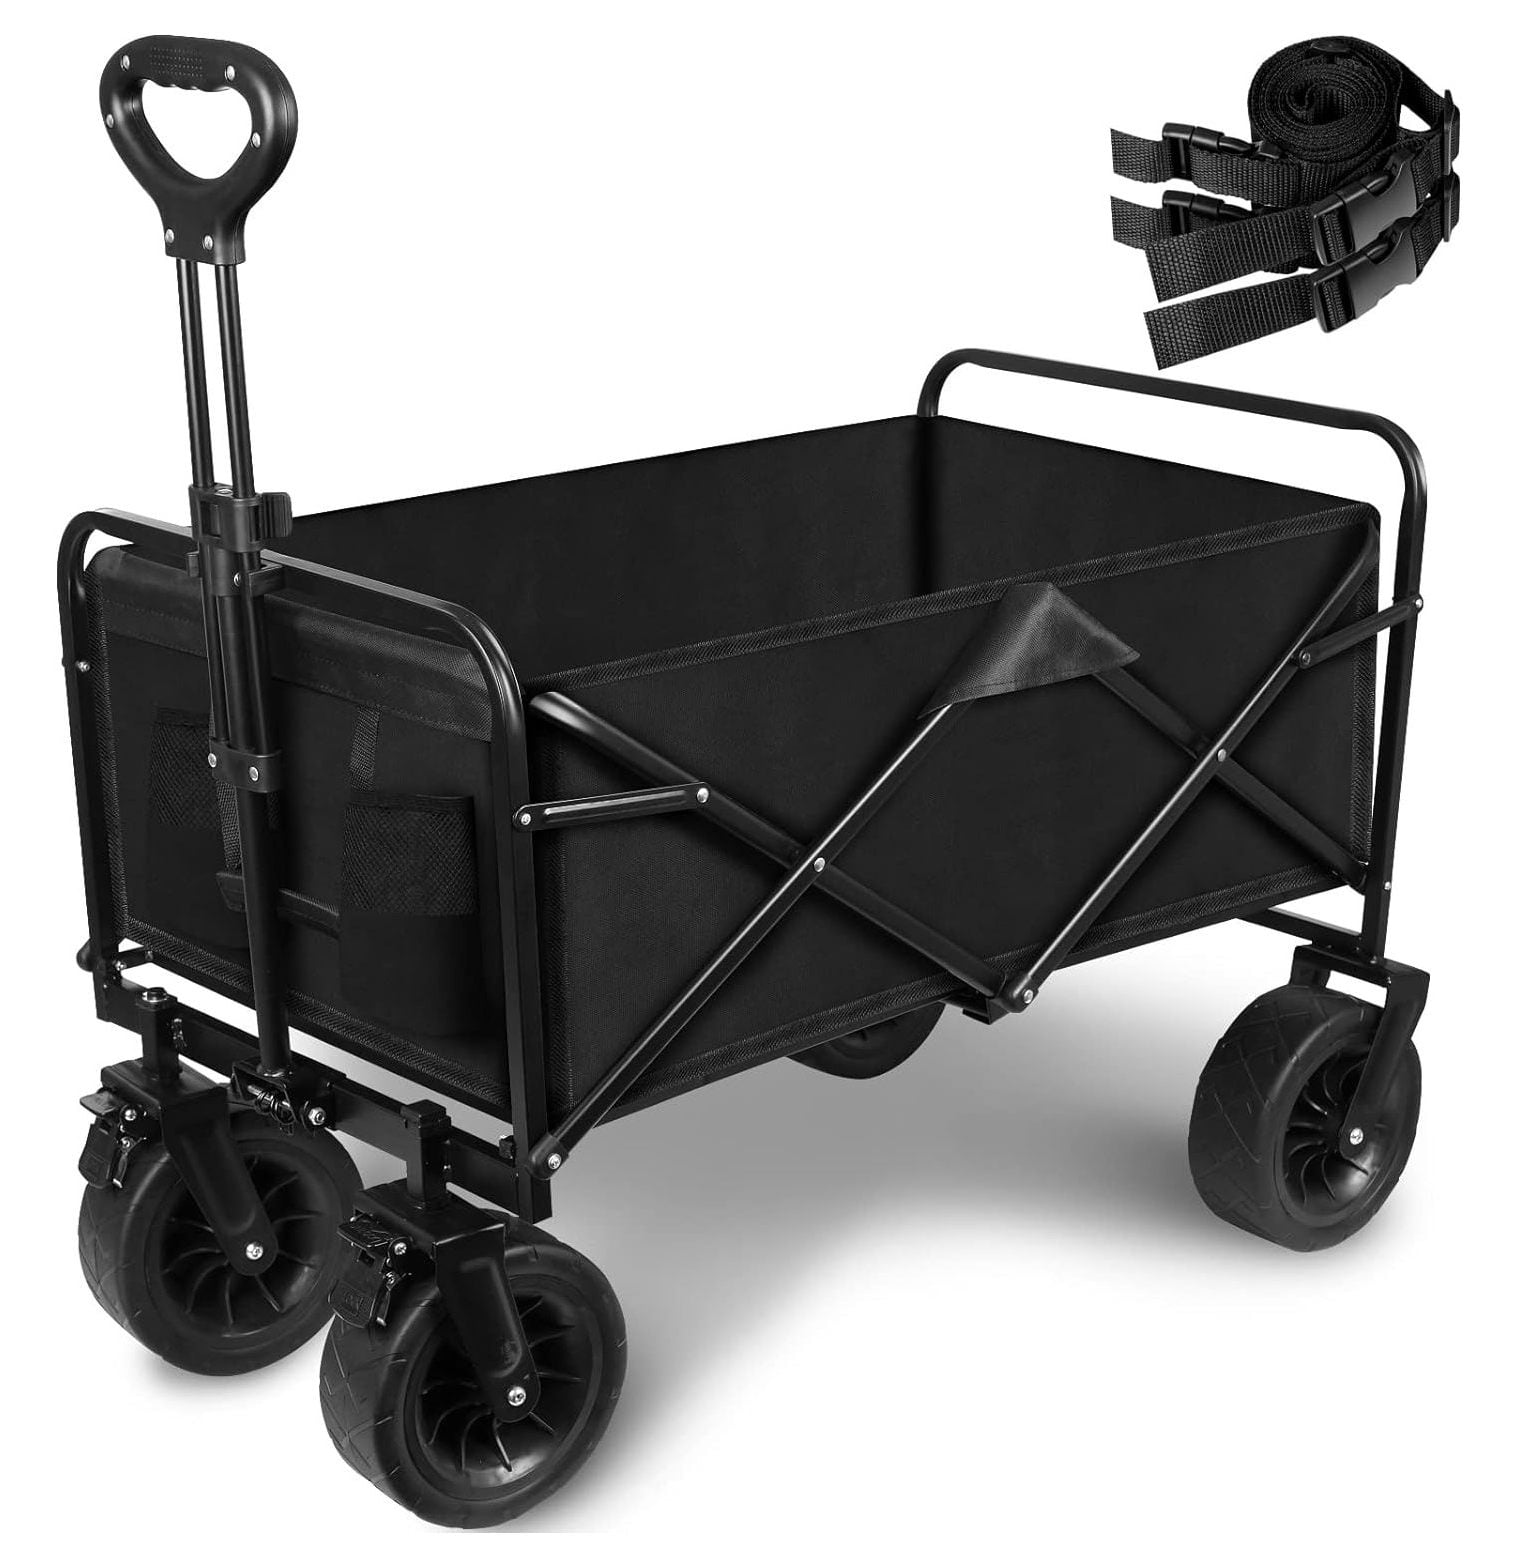 Collapsible Wagon Cart, Portable Heavy Duty Large Capacity Outdoor